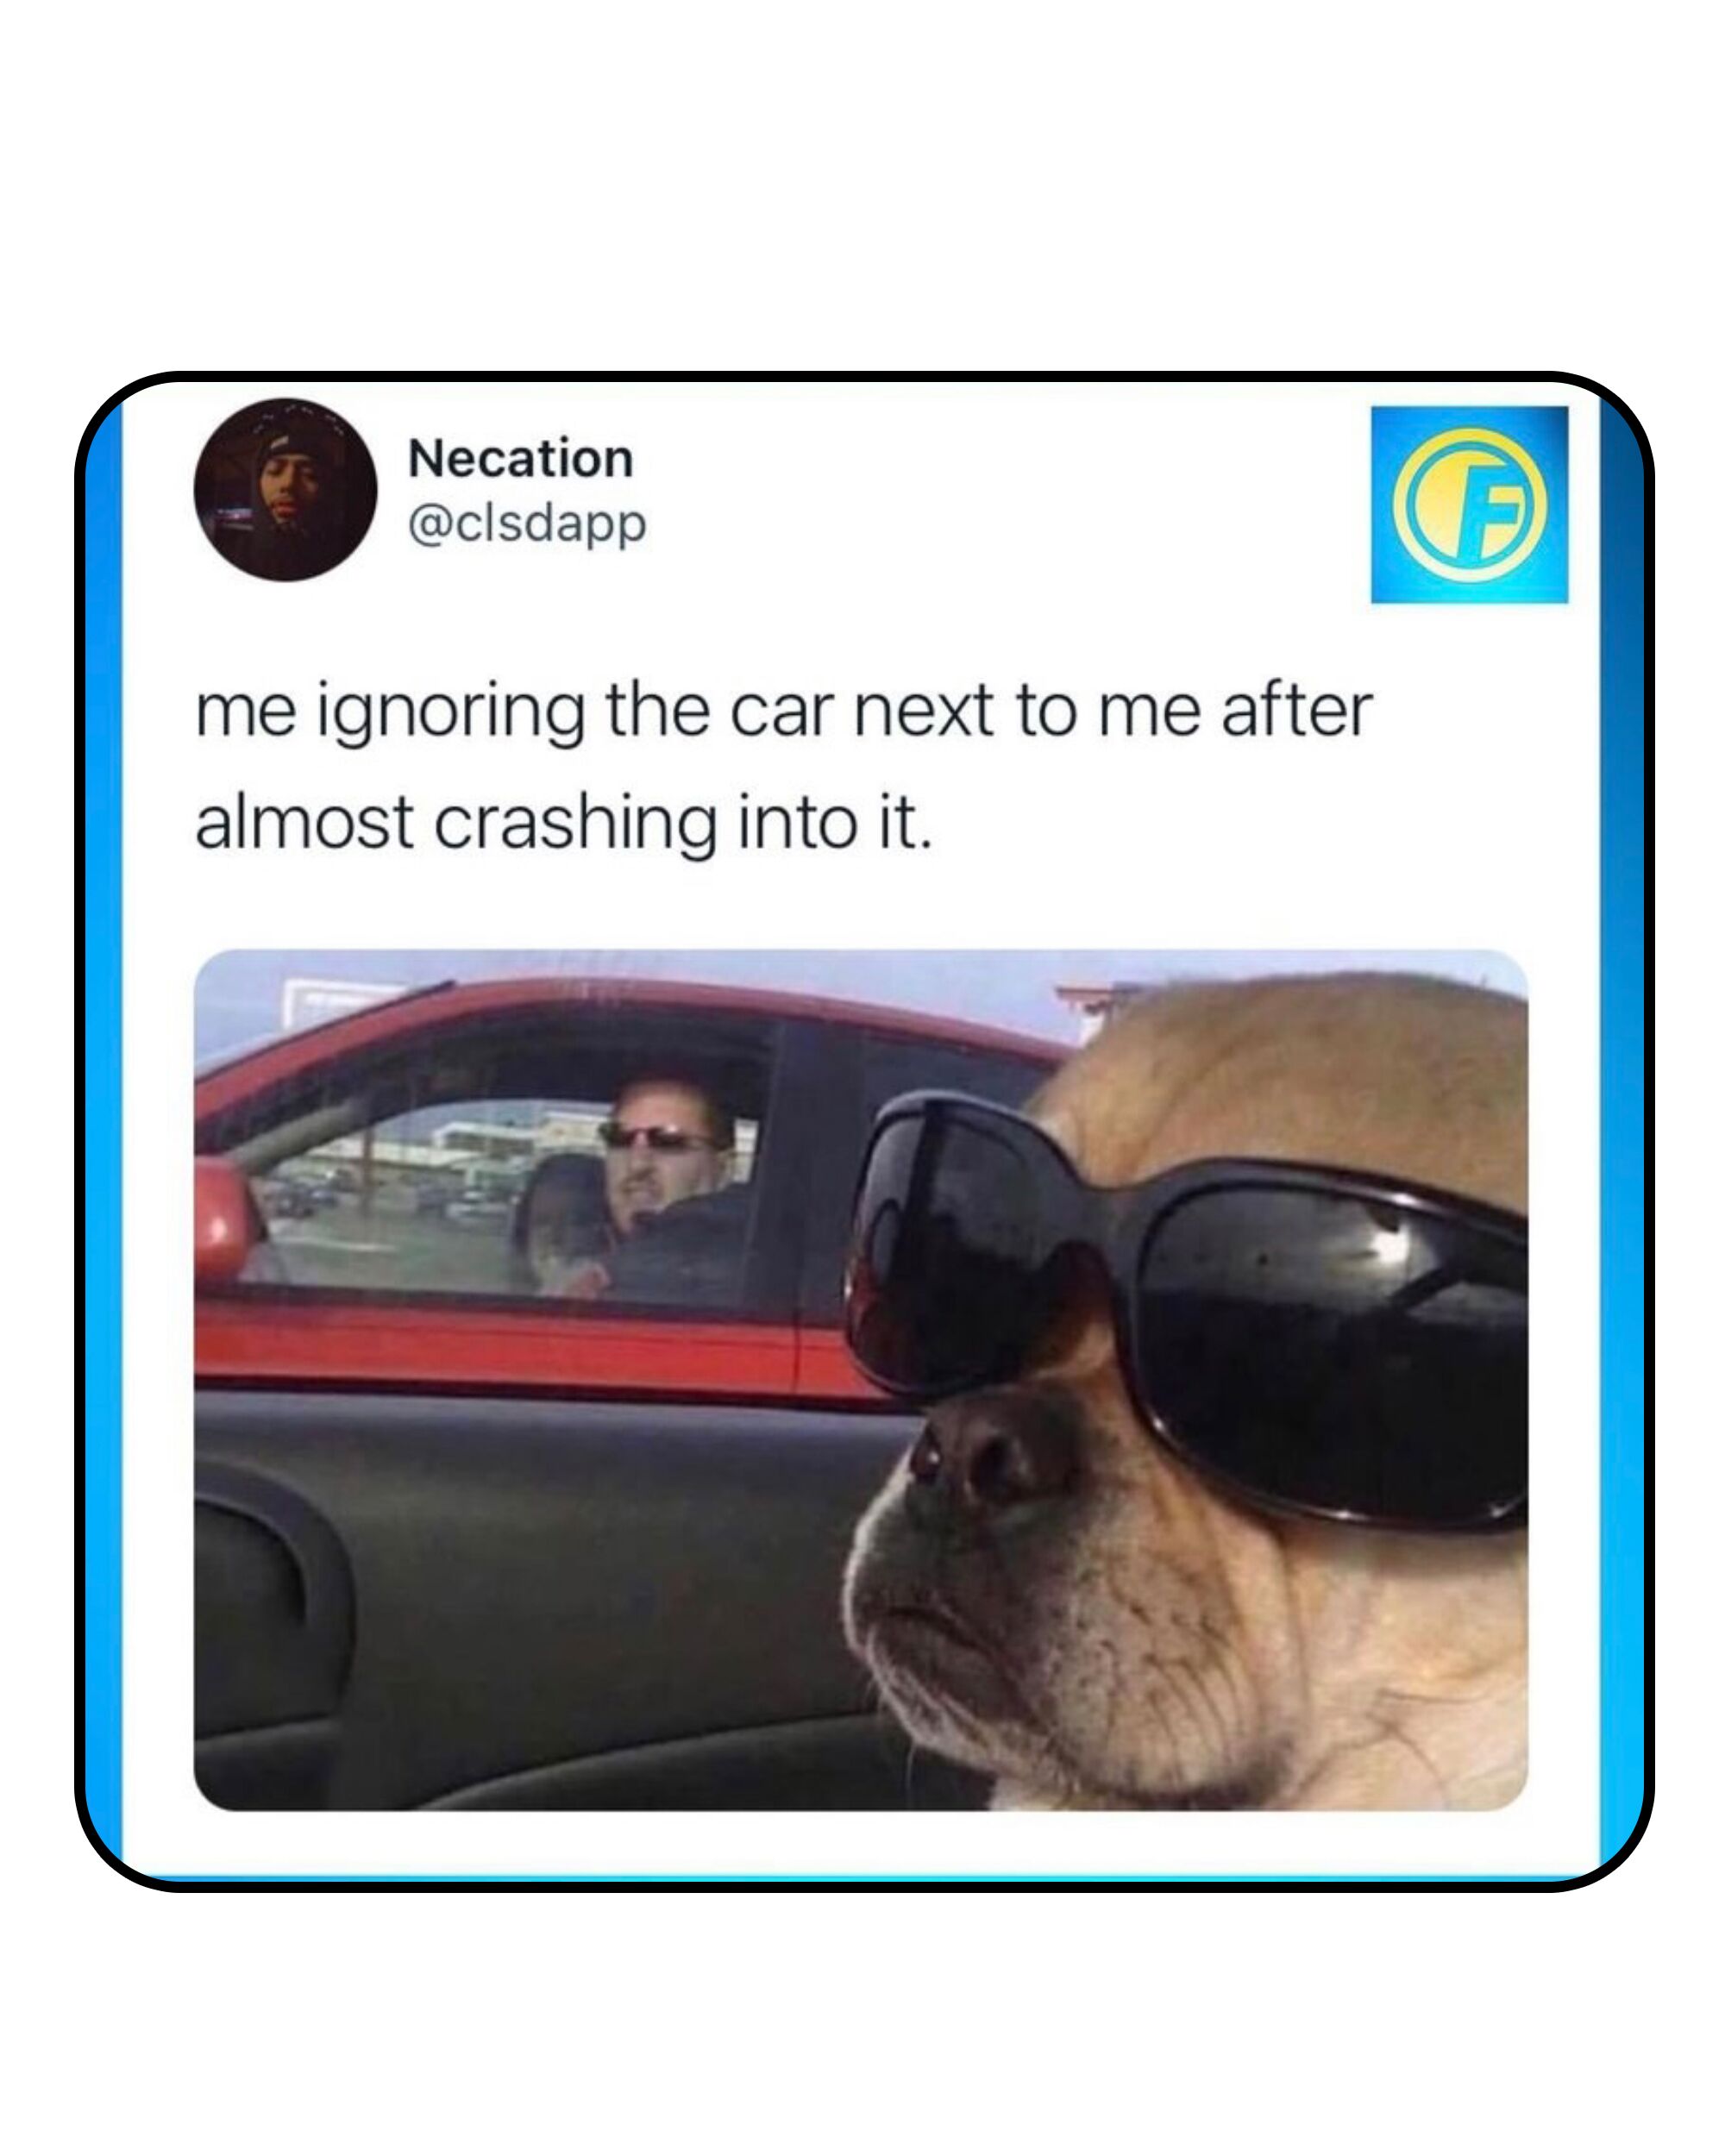 Tweet reading "me ignoring the car next to me after almost crashing into it." With a photo of a dog wearing sunglasses